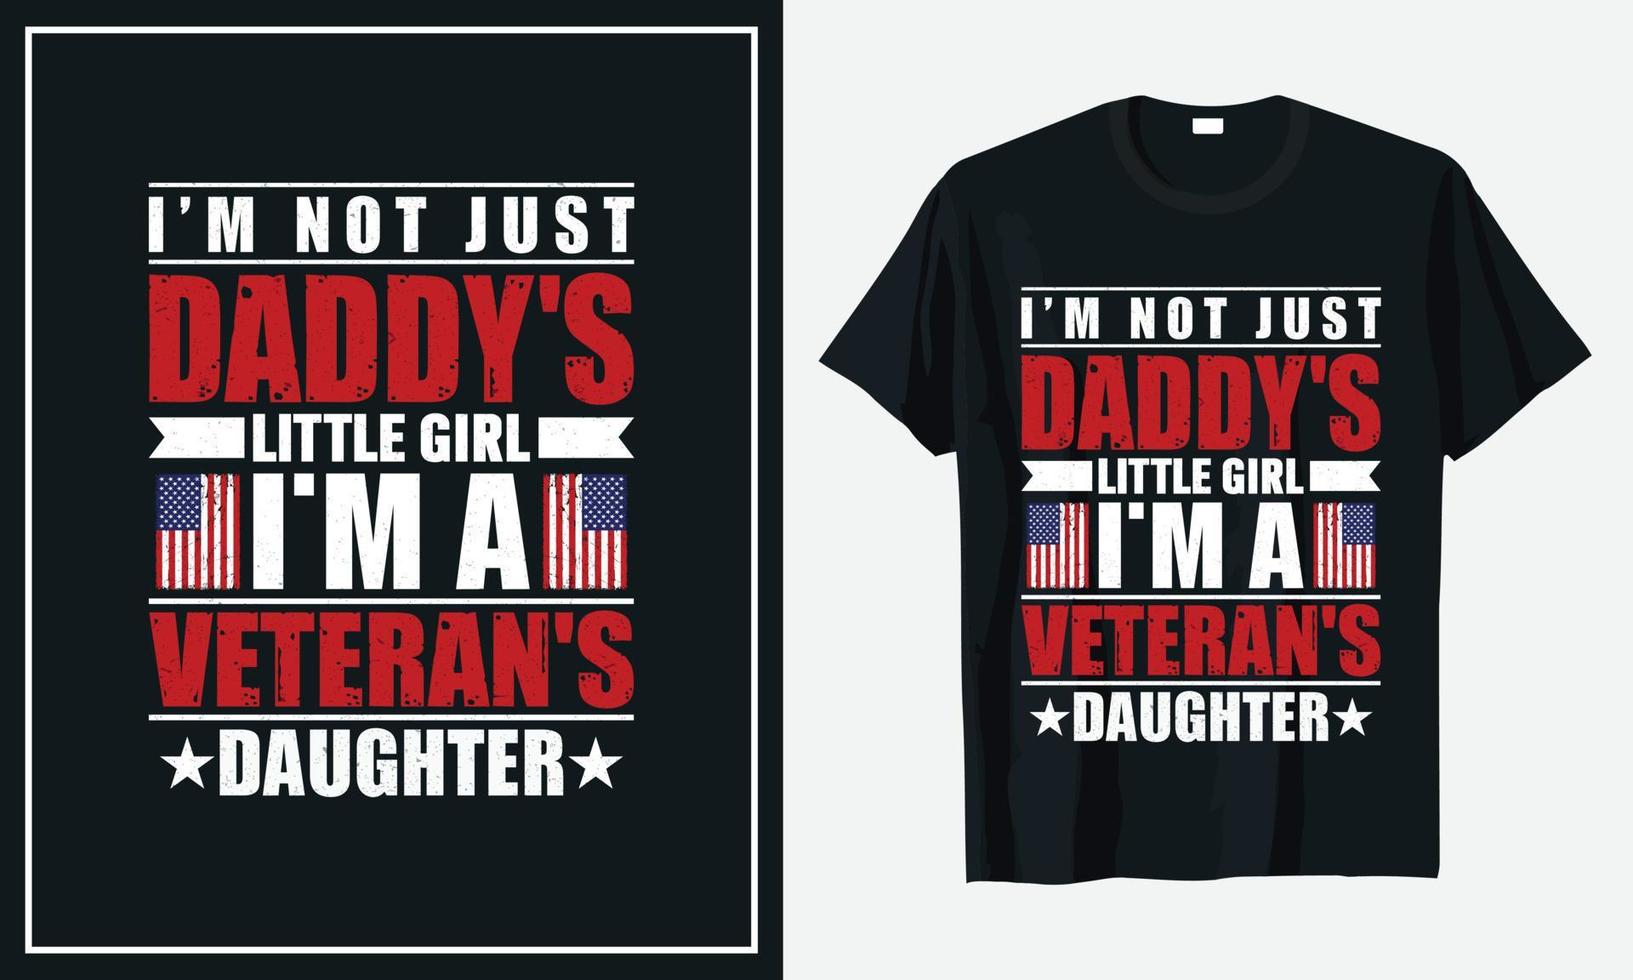 Veteran of the United States Army t-shirt design vector